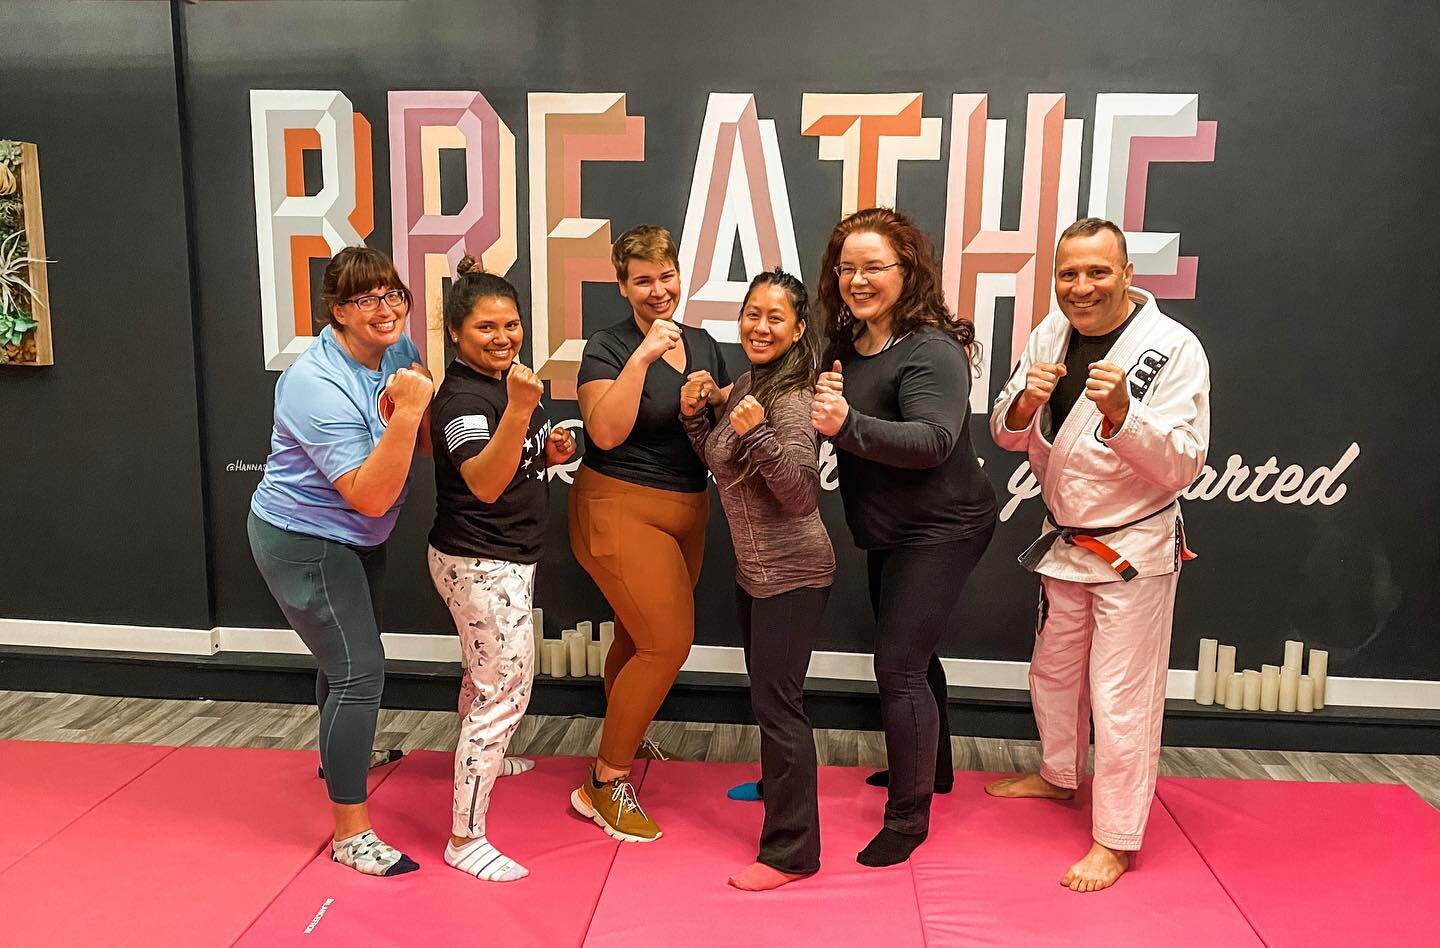 We&rsquo;ve partnered up with The Phoenix Activities and host a FREE &amp; SOBER Women&rsquo;s Self Defense Class! Happening at Ohana RR every Thursday at 5pm, facilitated by our safe &amp; sober friend, Mark. All women welcome, only requirement is 4